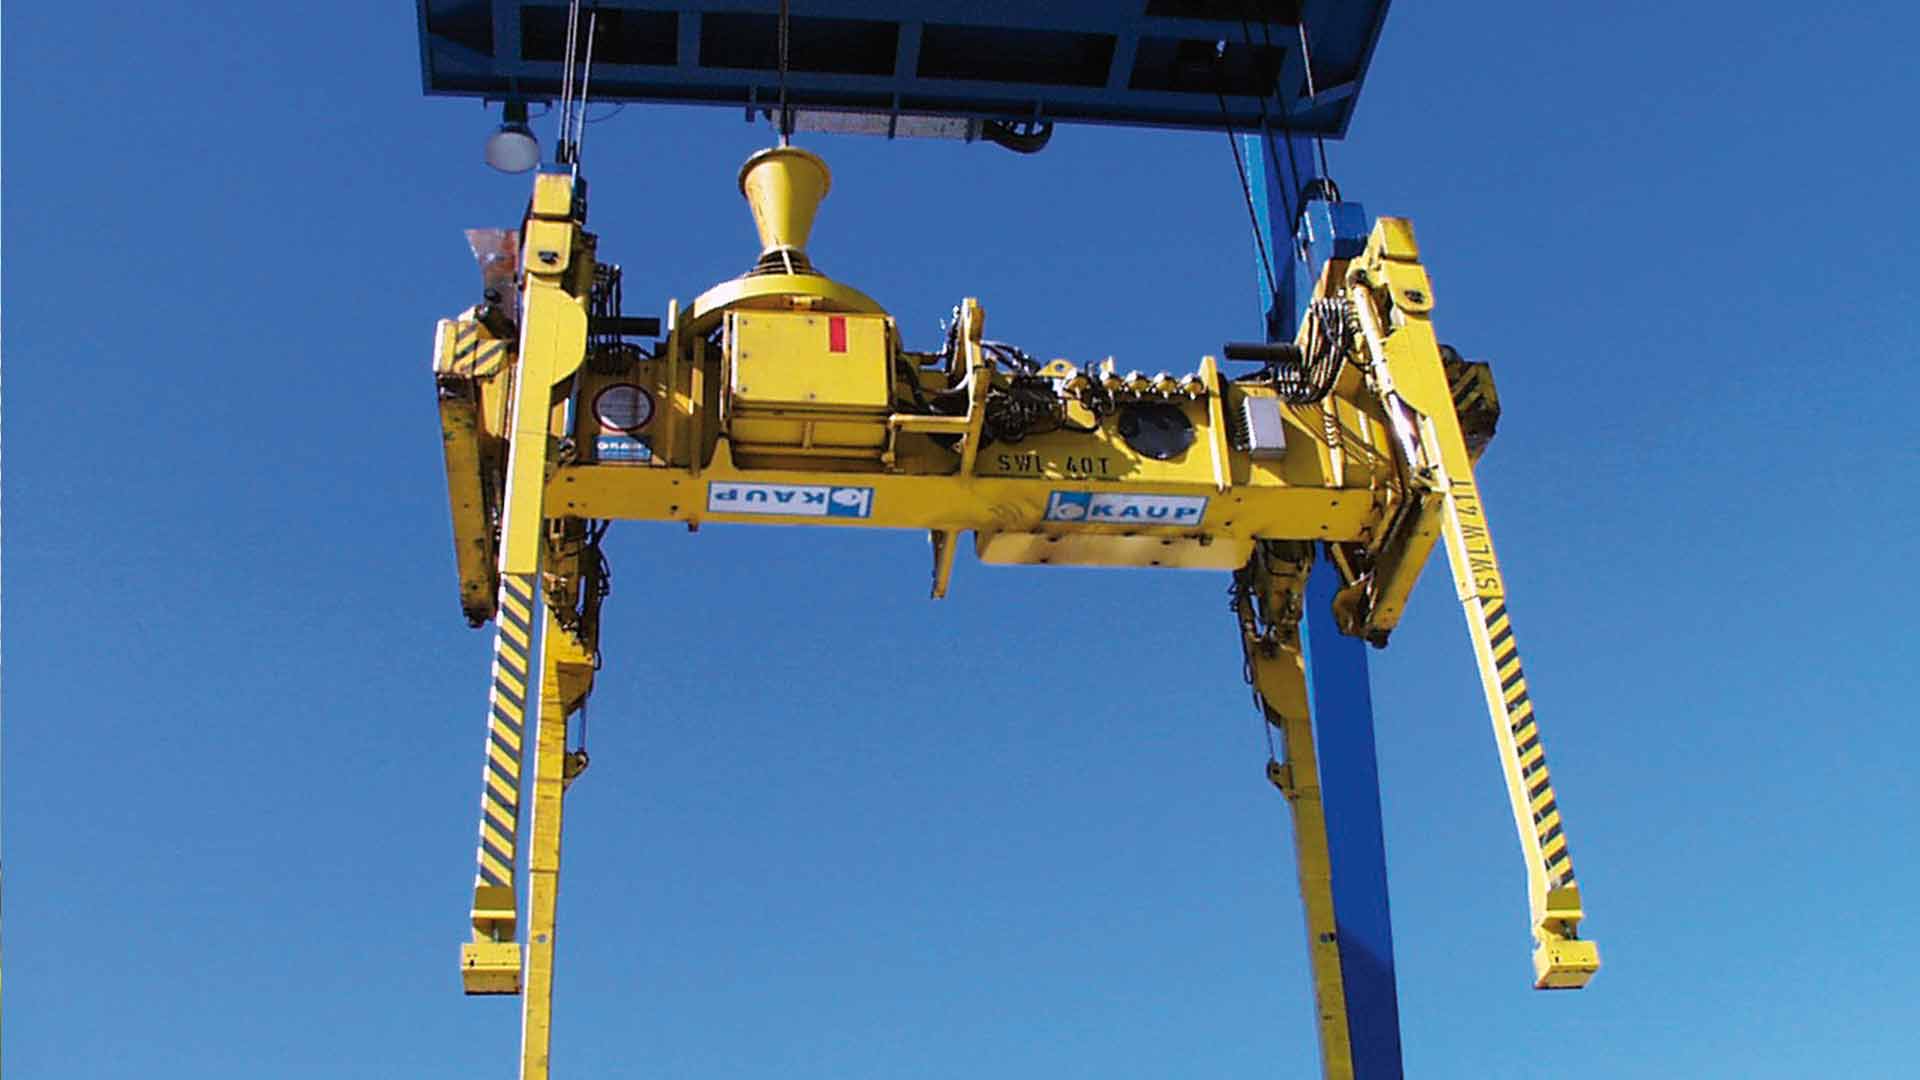 Large yellow container spreader from KAUP attached to a crane in front of a blue sky